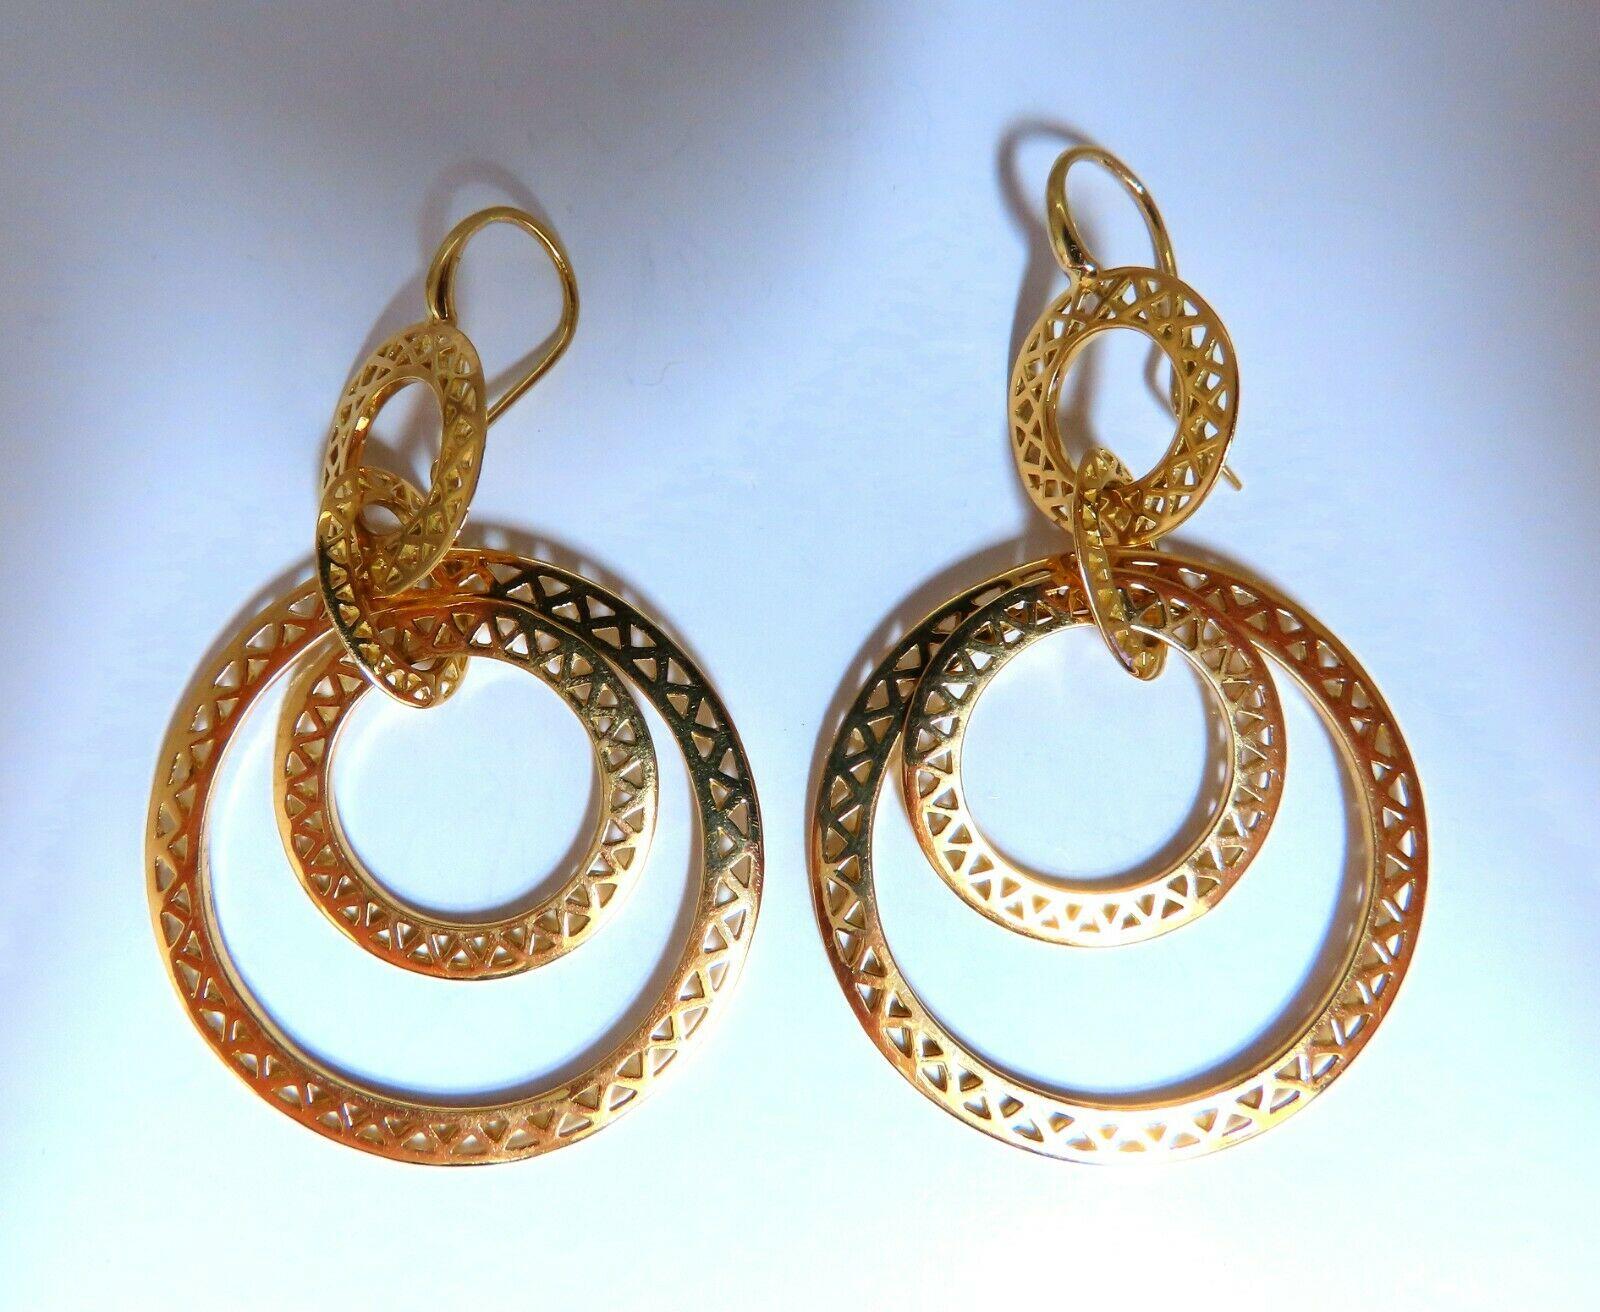 Circular Rolling Rings Dangle Earrings 18kt Gold In Excellent Condition For Sale In New York, NY